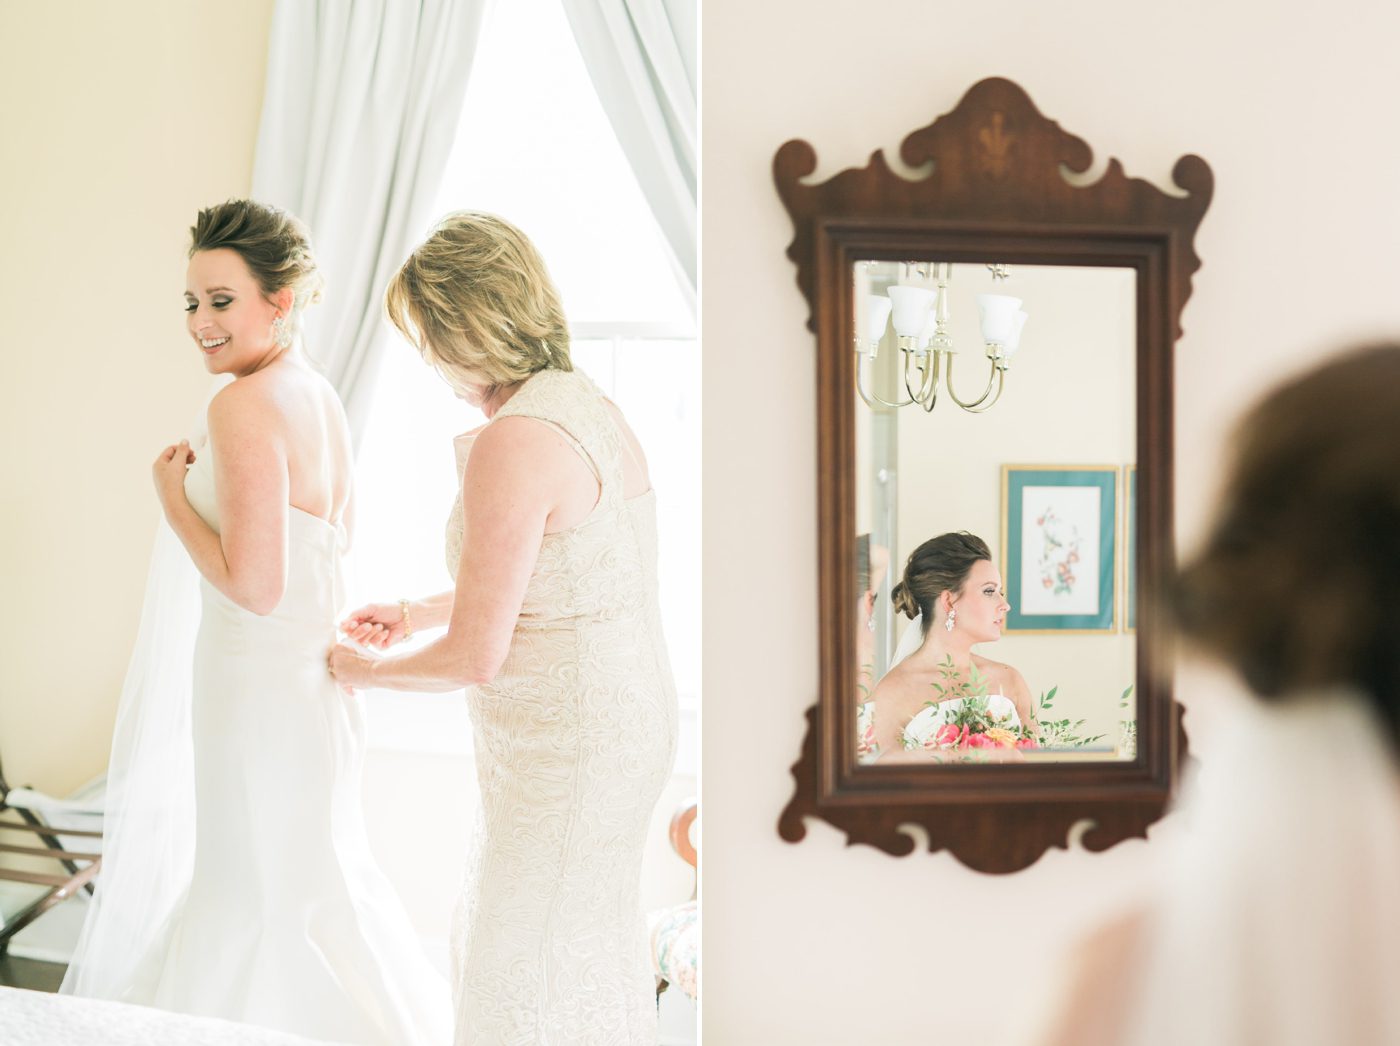 Mother of the bride helping her into her wedding gown at Oak Manor Inn. Photo by Charleston wedding photographer Catherine Ann Photography